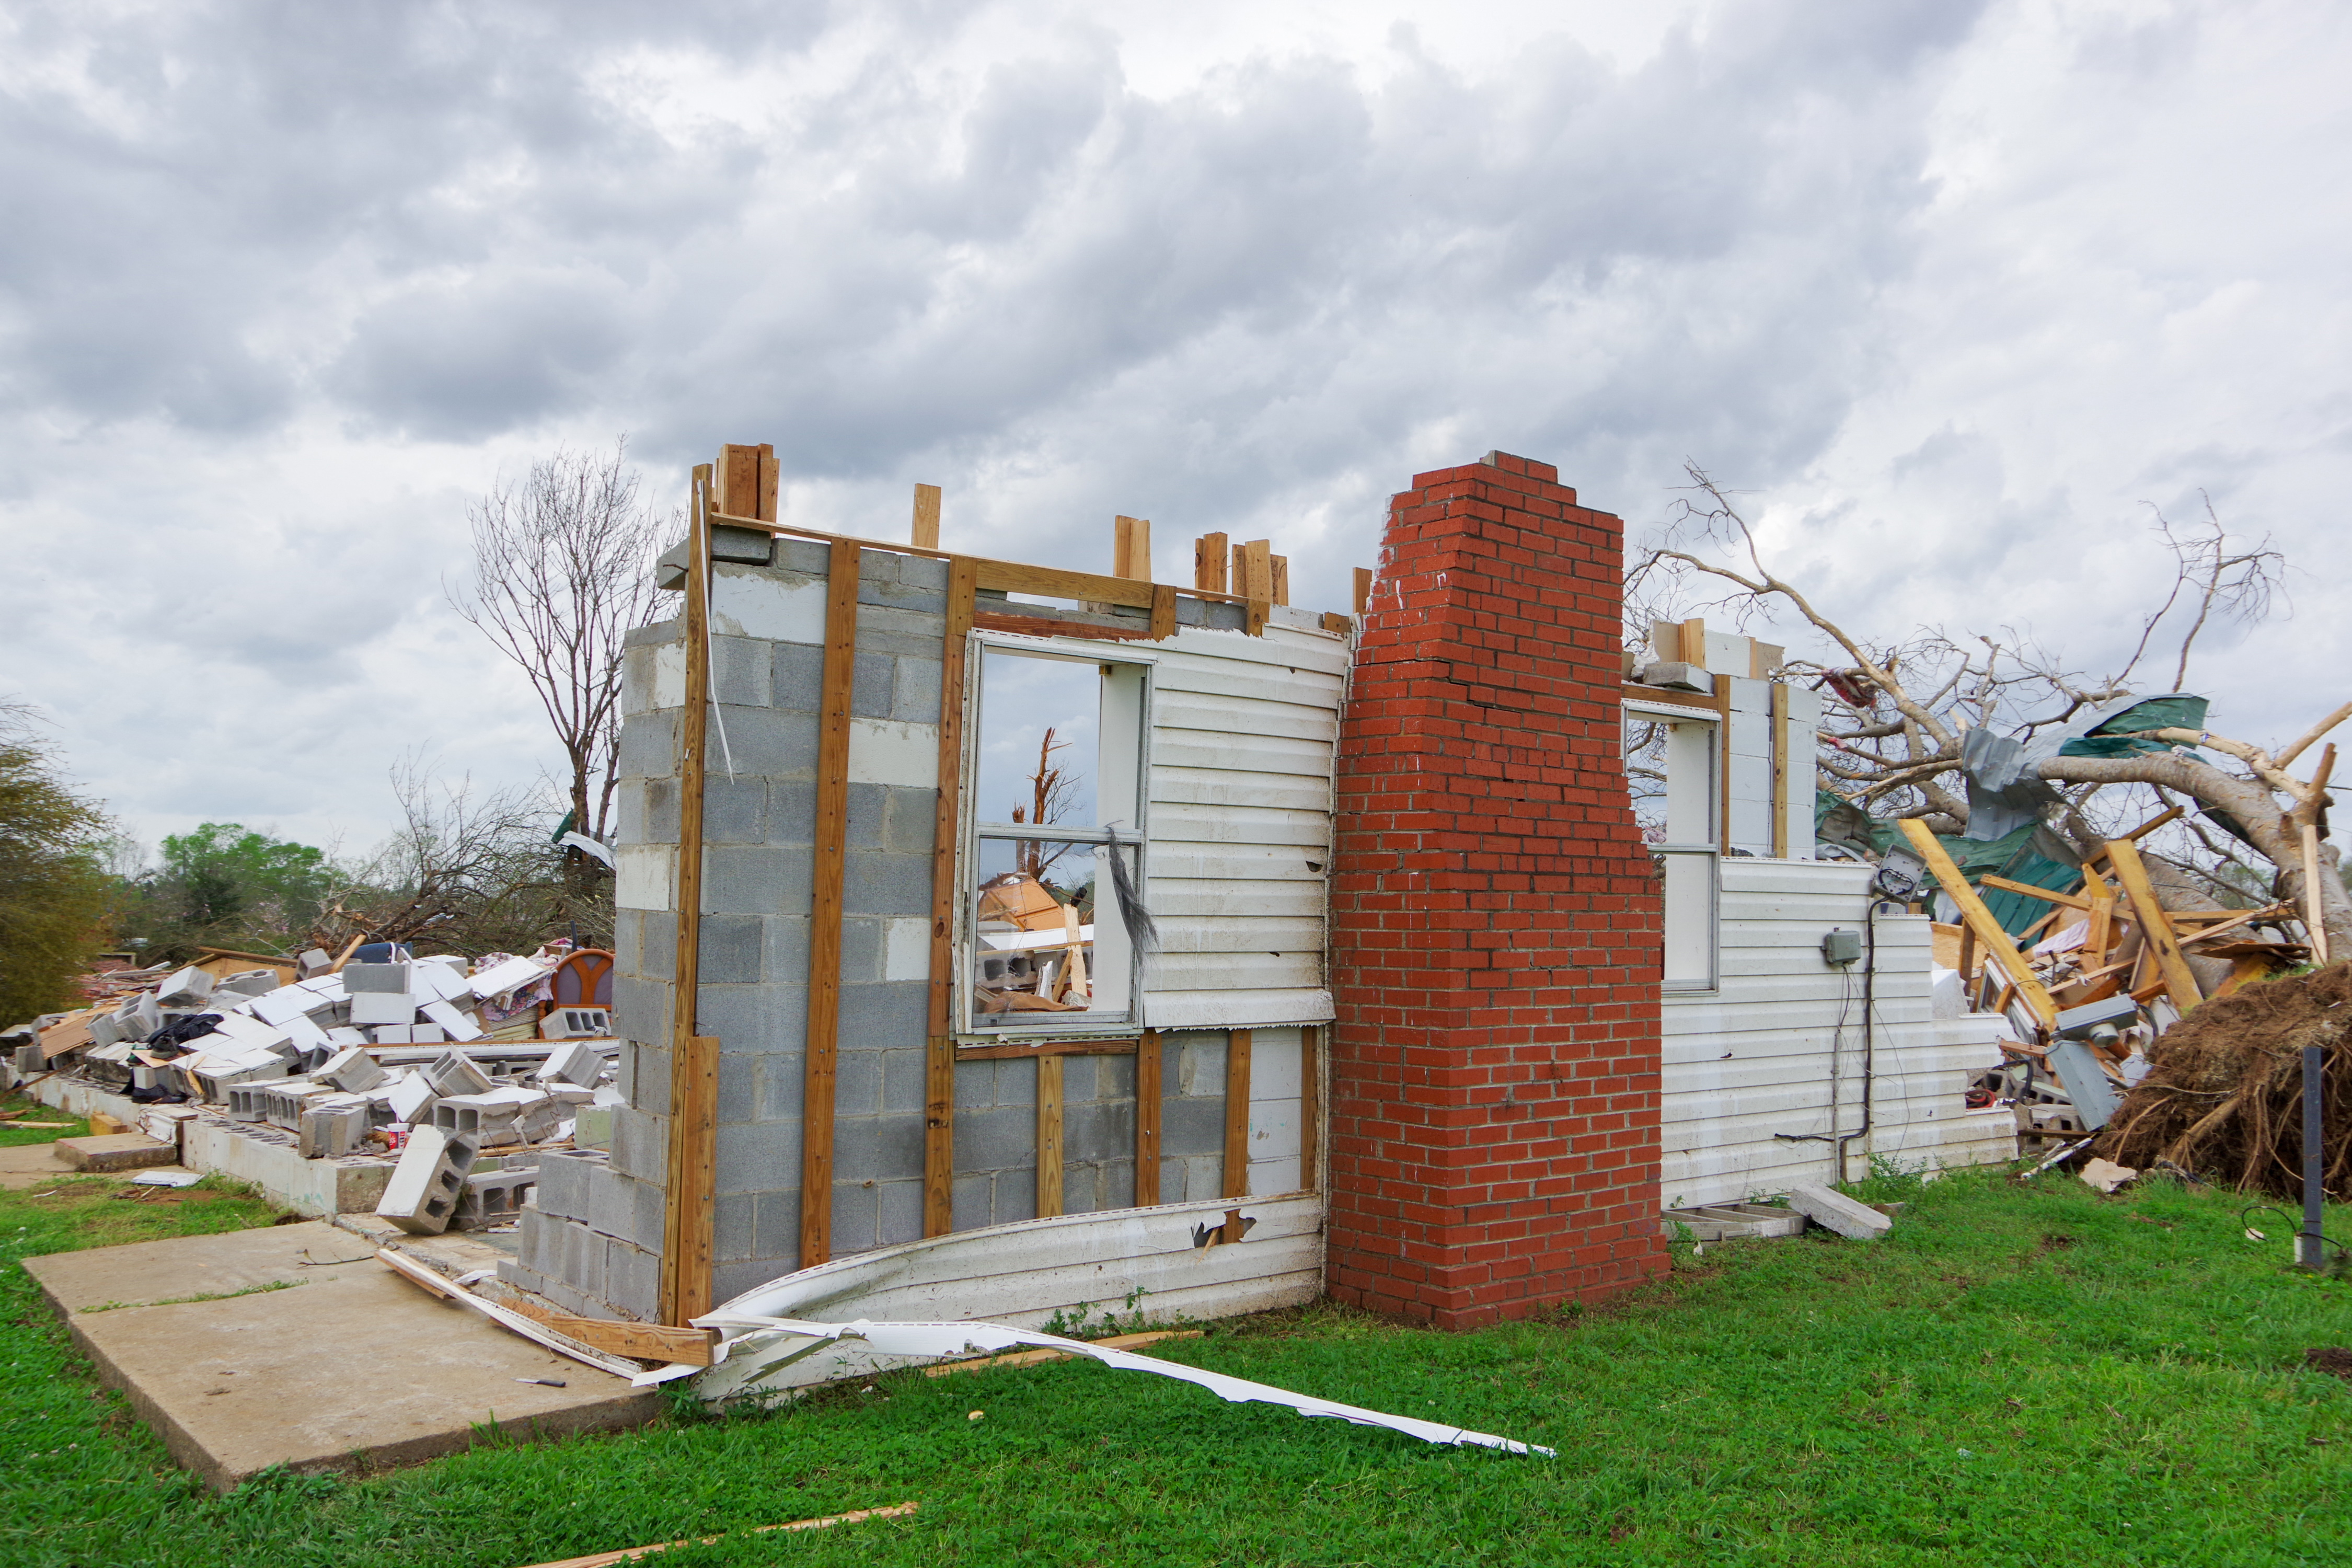 A tornado destroyed this home in Sawyerville, Alabama, on March 25, 2021 (Image credit NOAA)